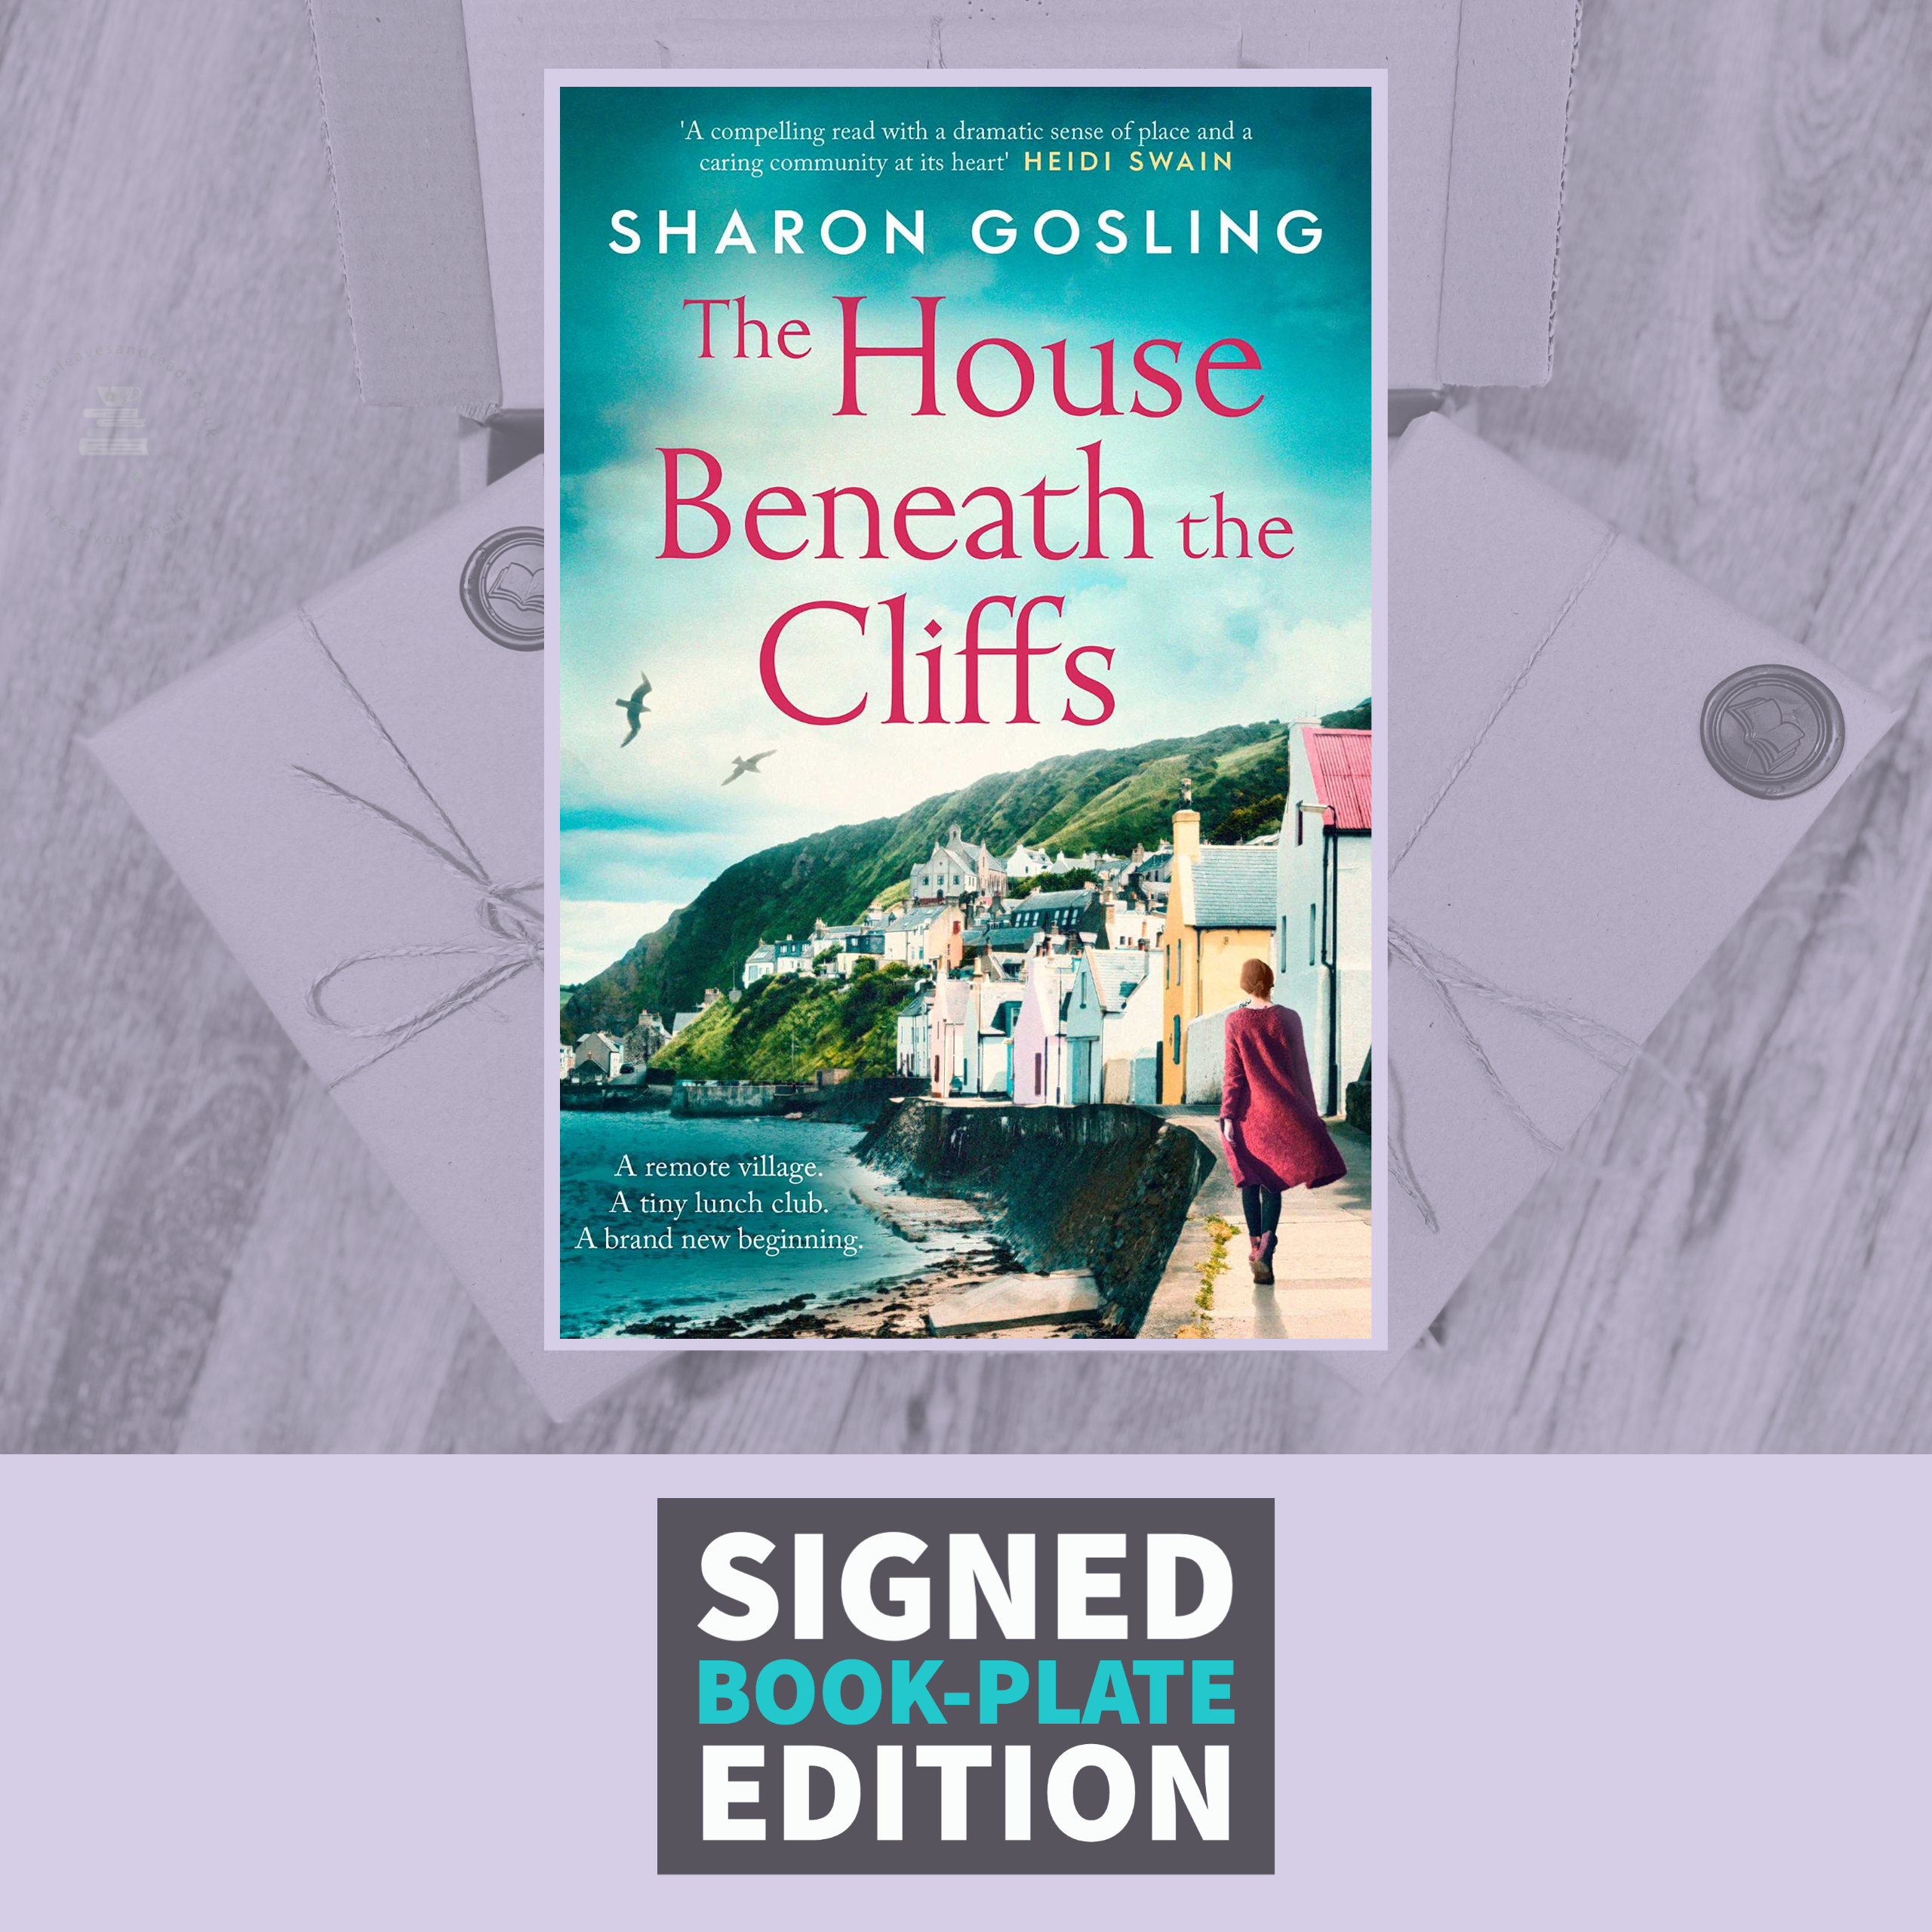 Cliffs　The　Sharon　the　Gosling　Bookplate)　Beneath　House　Tea　by　(Signed　Leaves　Reads